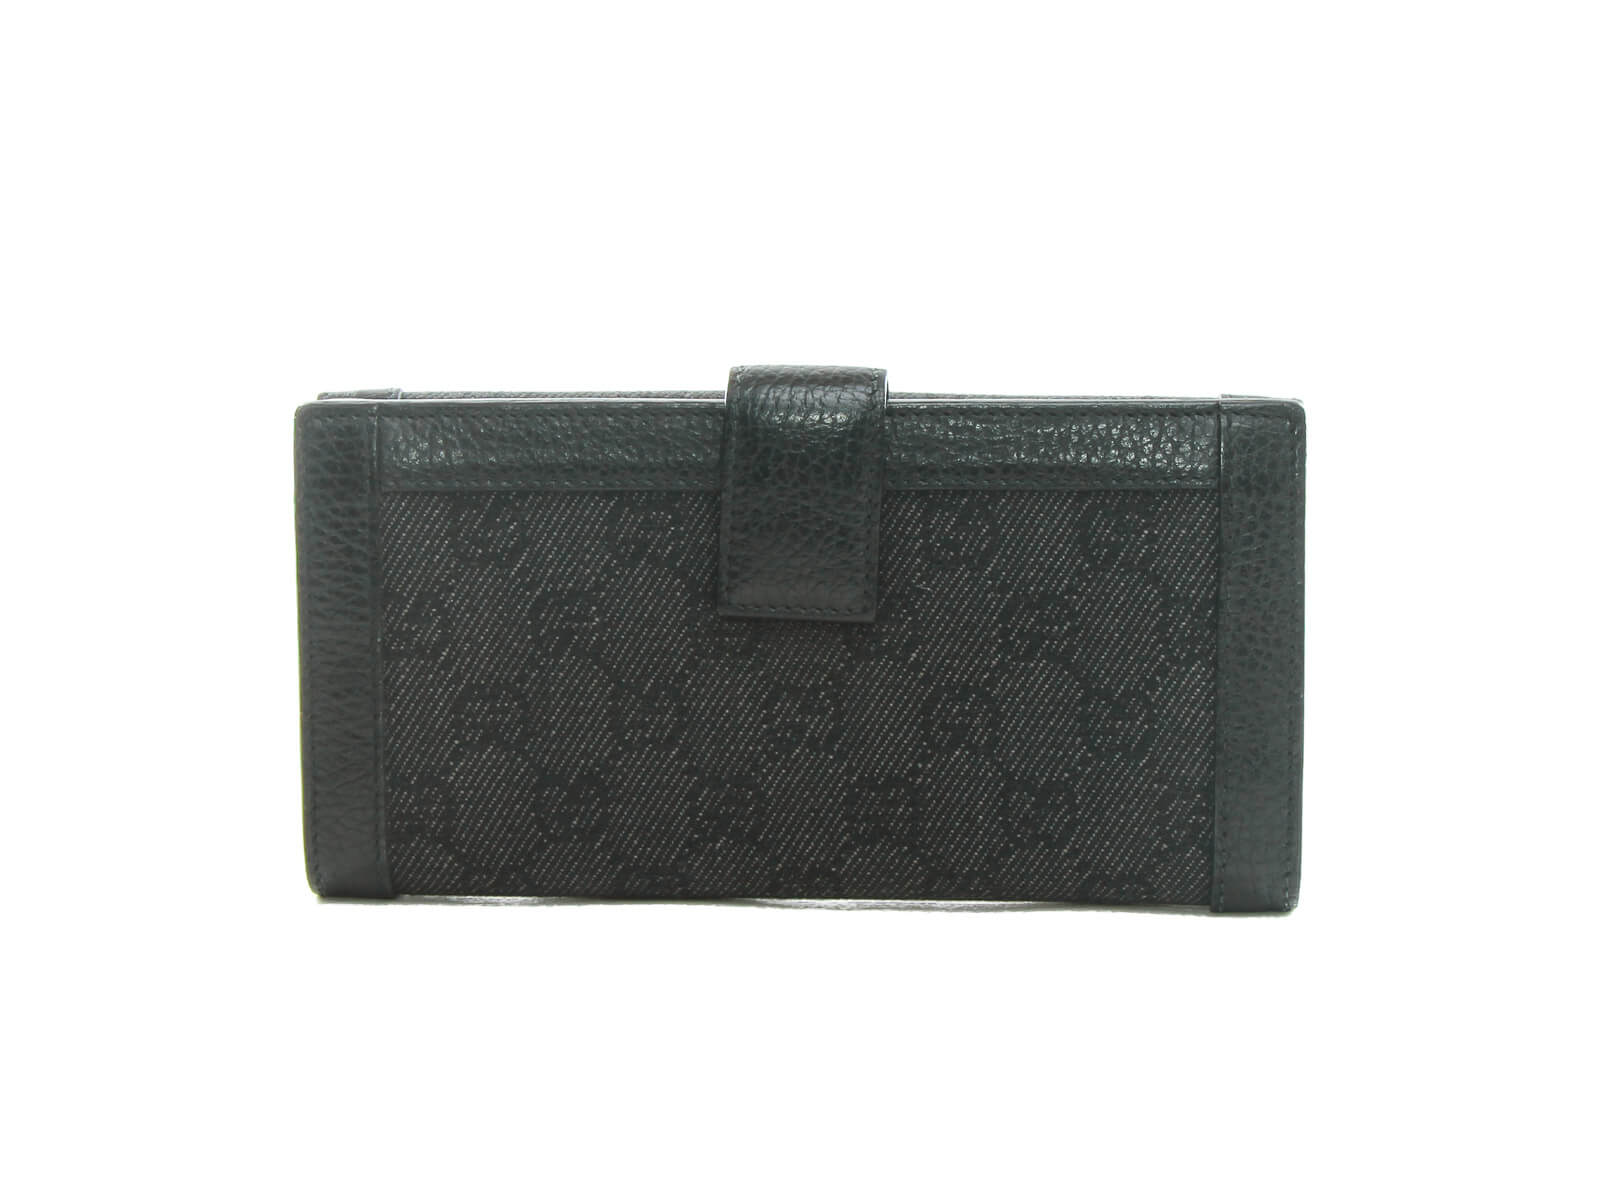 Authentic Gucci Long Wallet Brown Guccissima Leather